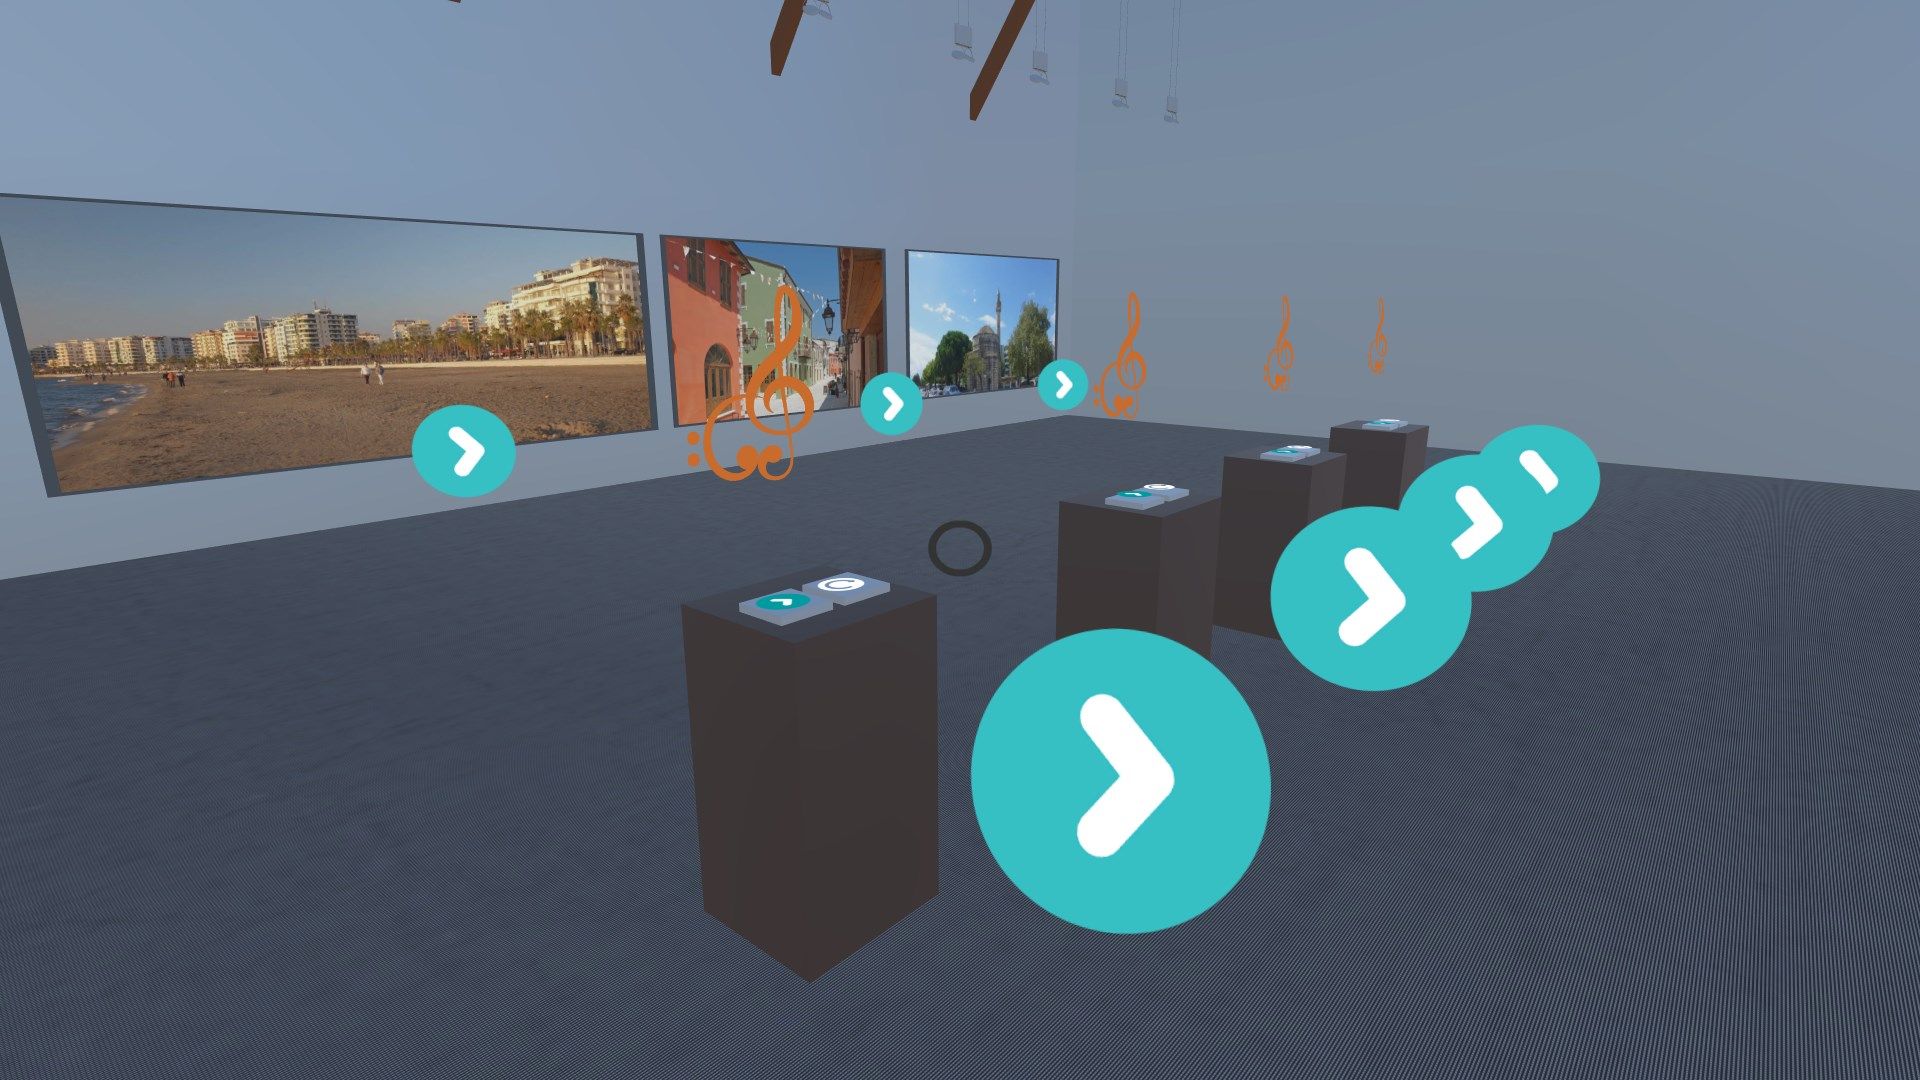 POLYPHONIA VR Museum